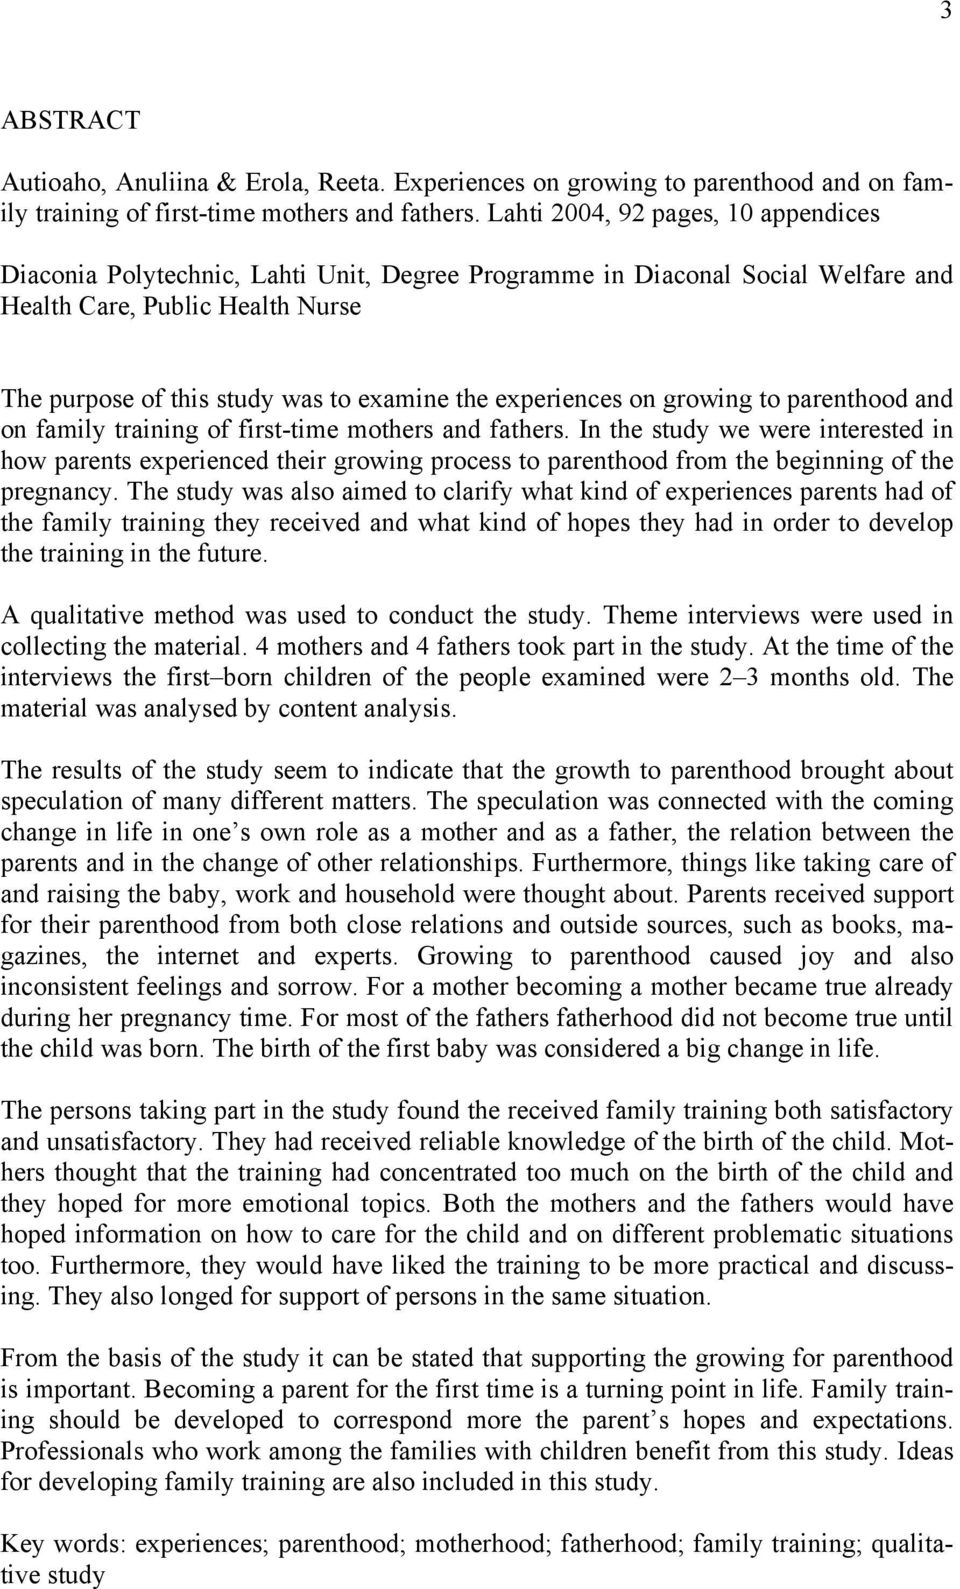 experiences on growing to parenthood and on family training of first-time mothers and fathers.